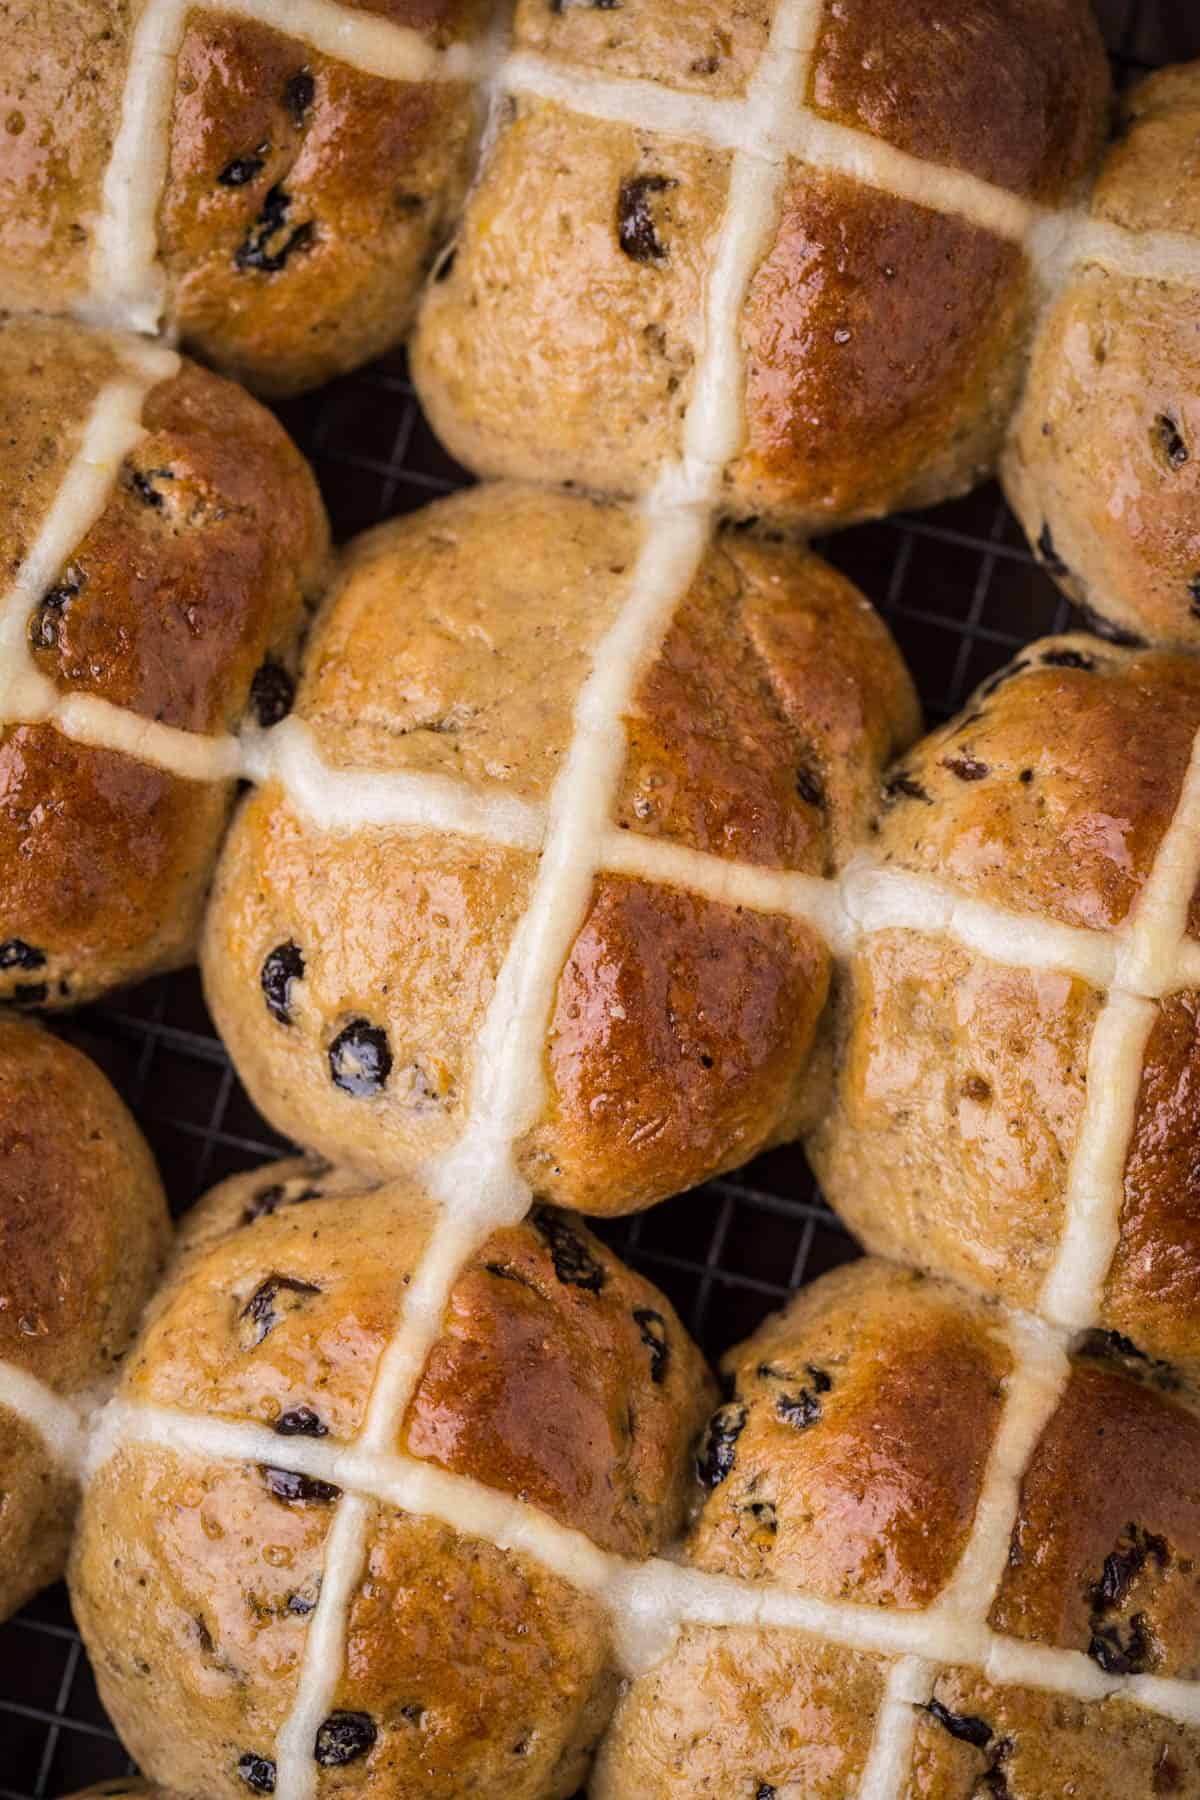 Hot Cross Buns closely packed together fresh from the oven.